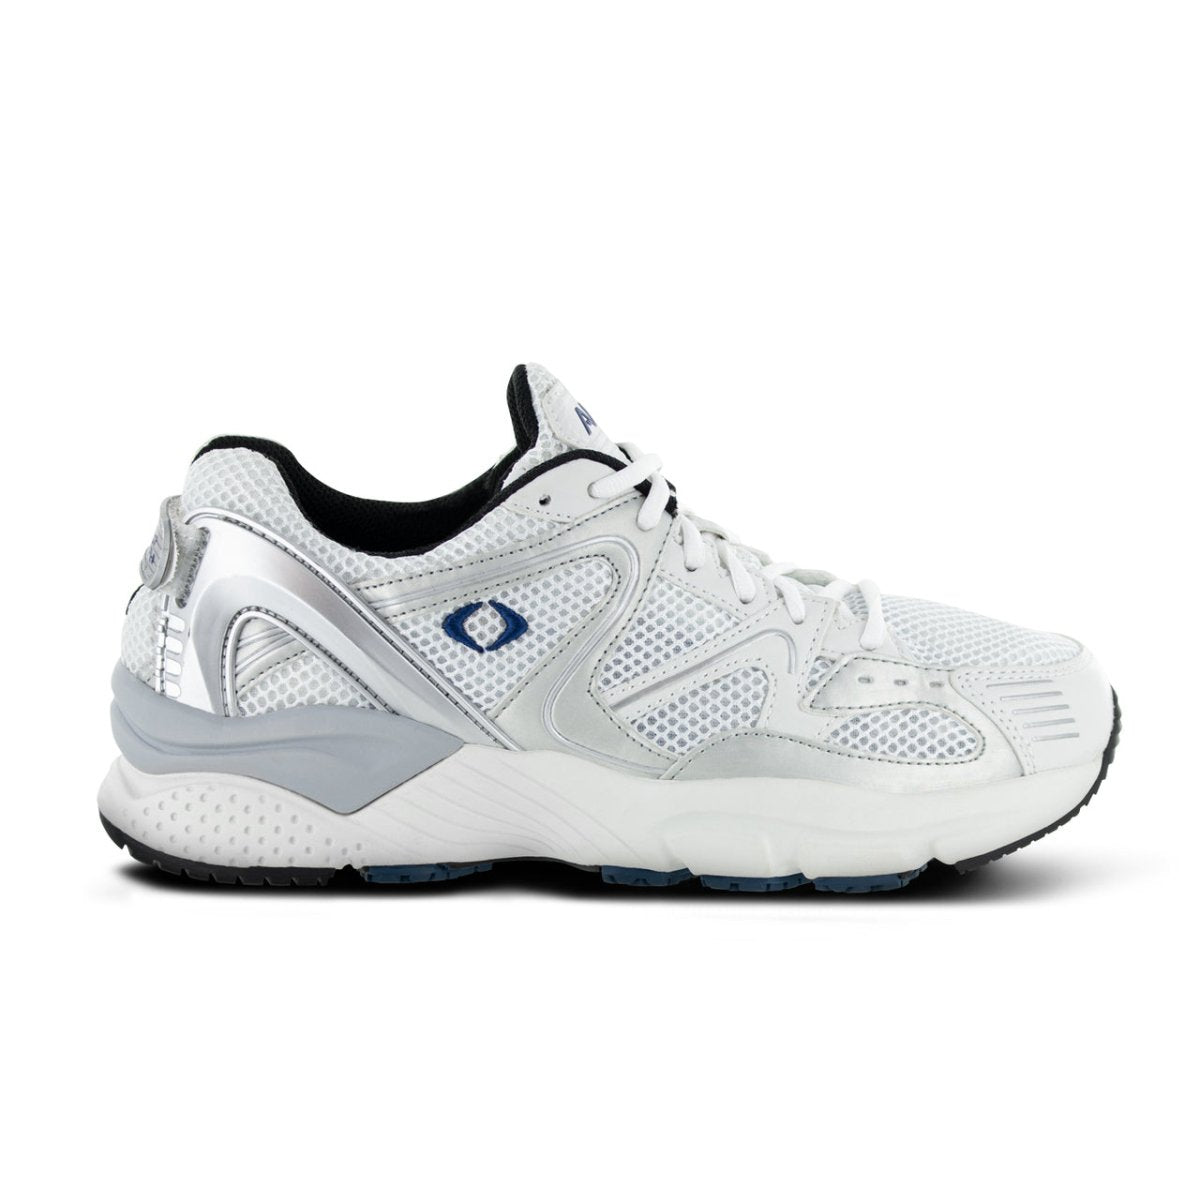 APEX X522M BOSS RUNNER MEN'S ACTIVE SHOE IN WHITE/SILVER/BLUE - TLW Shoes